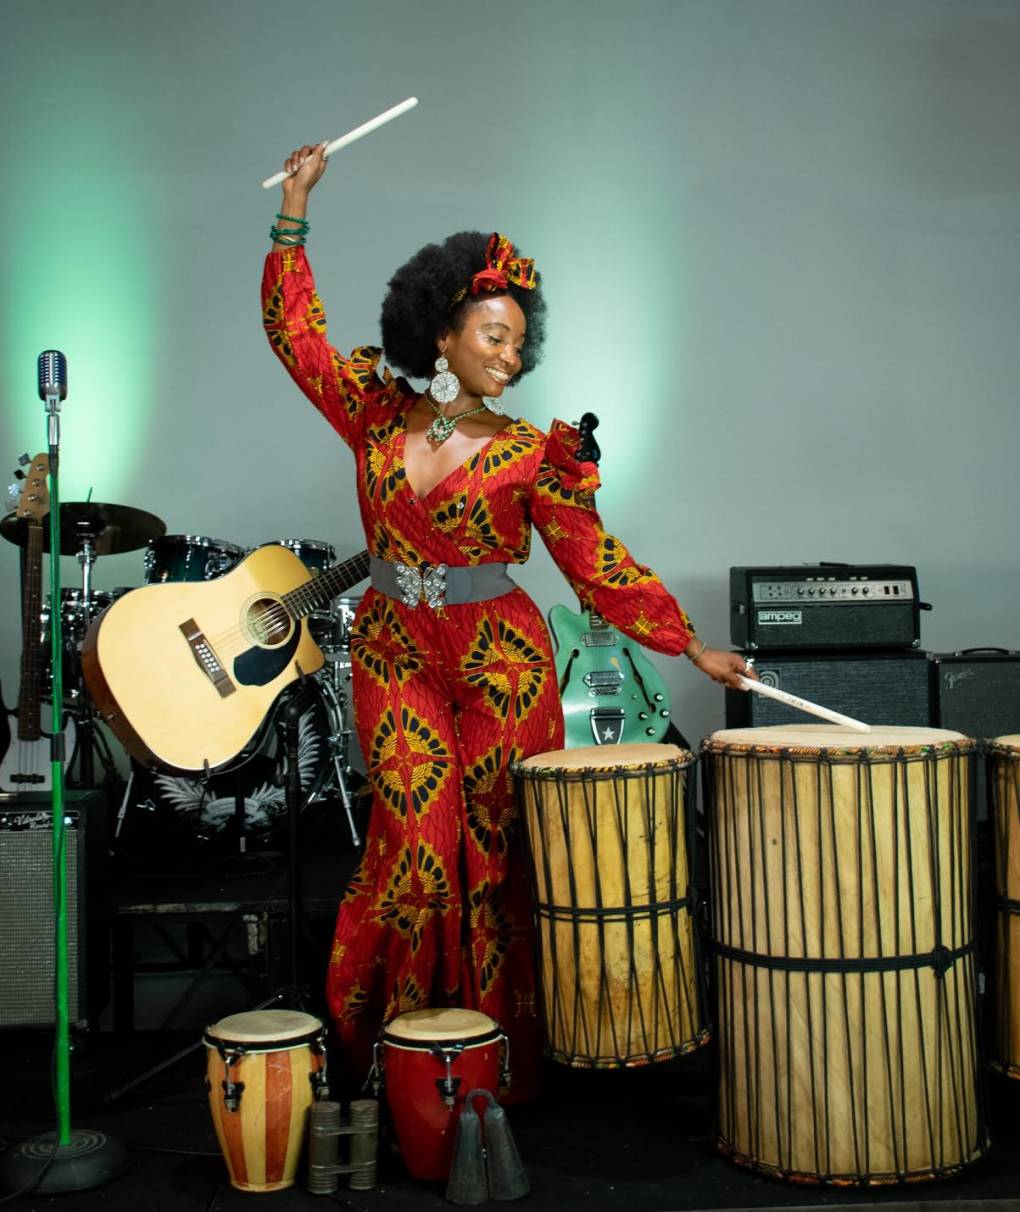 Queen Iminah plays the drums while wearing a guitar over her shoulder.